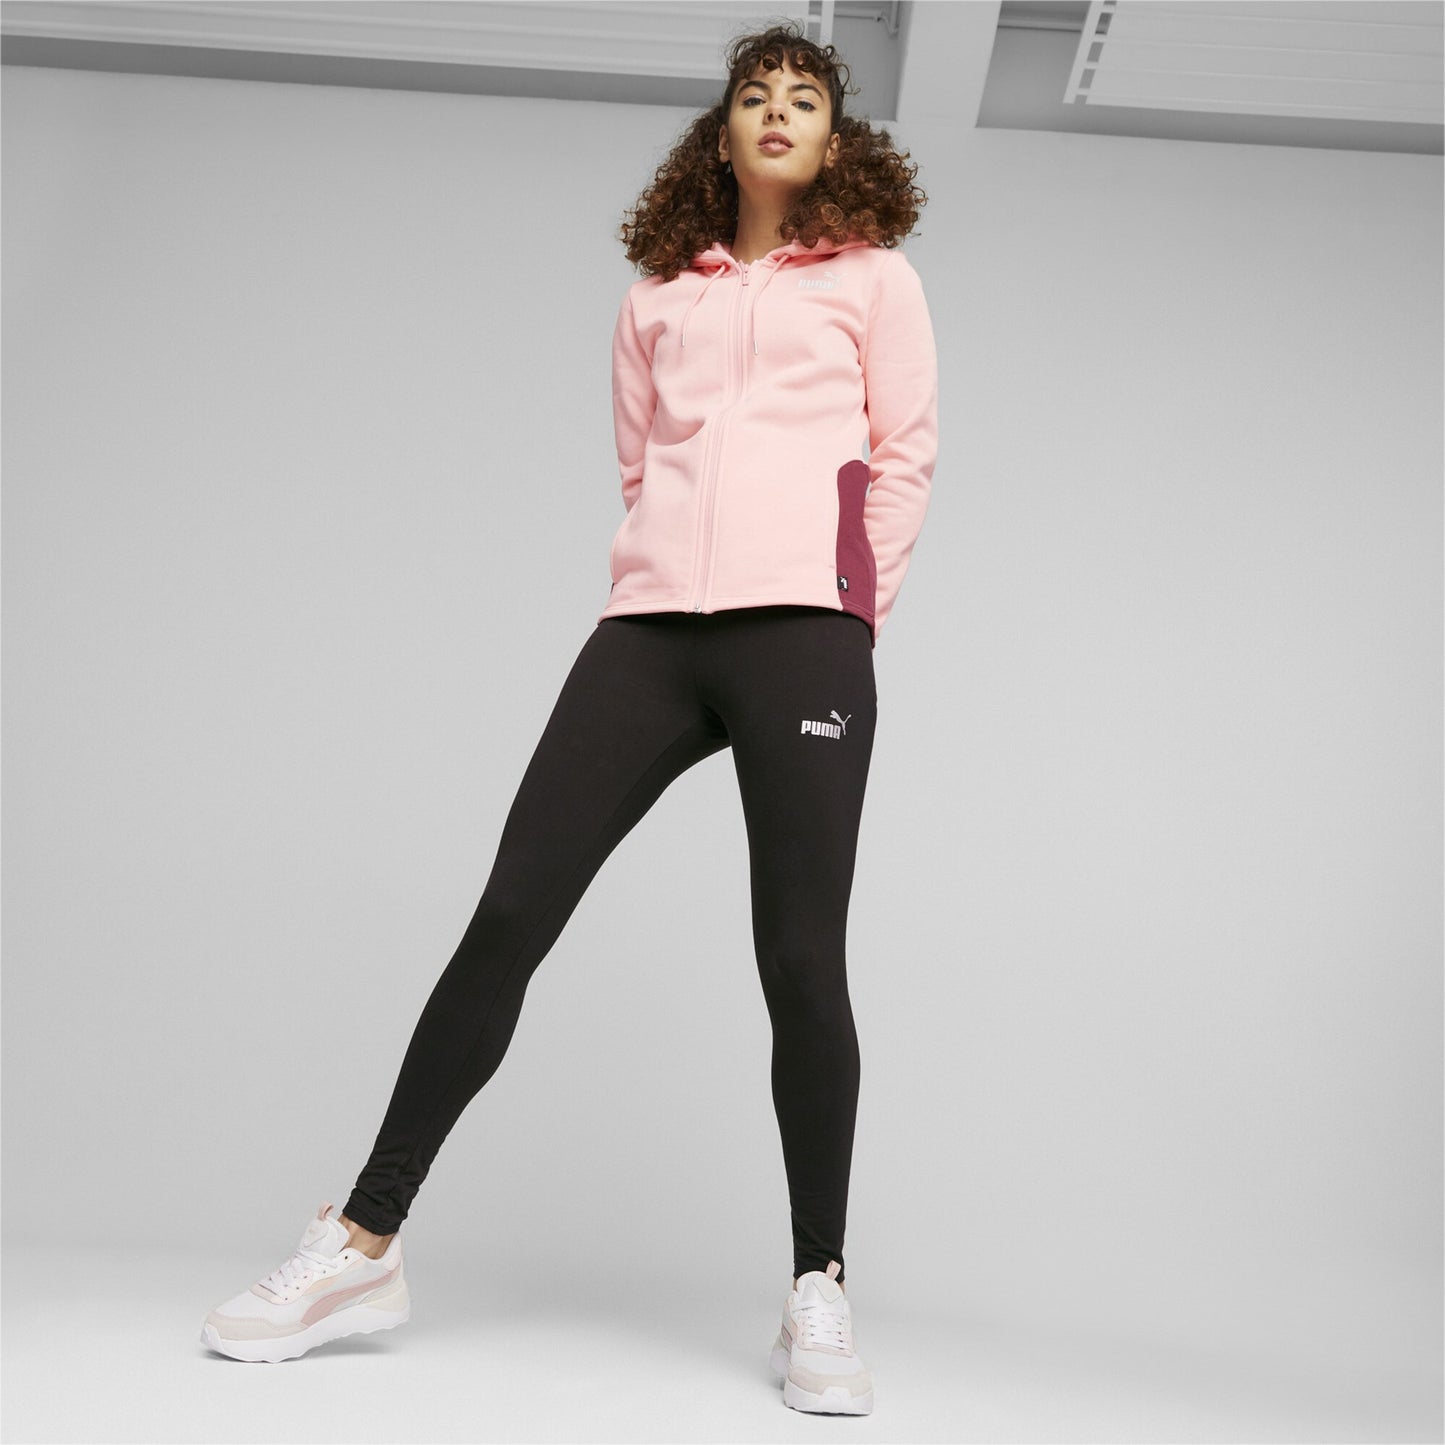 Chándal mujer Puma METALLIC TRACKSUIT F (4 COLORES)